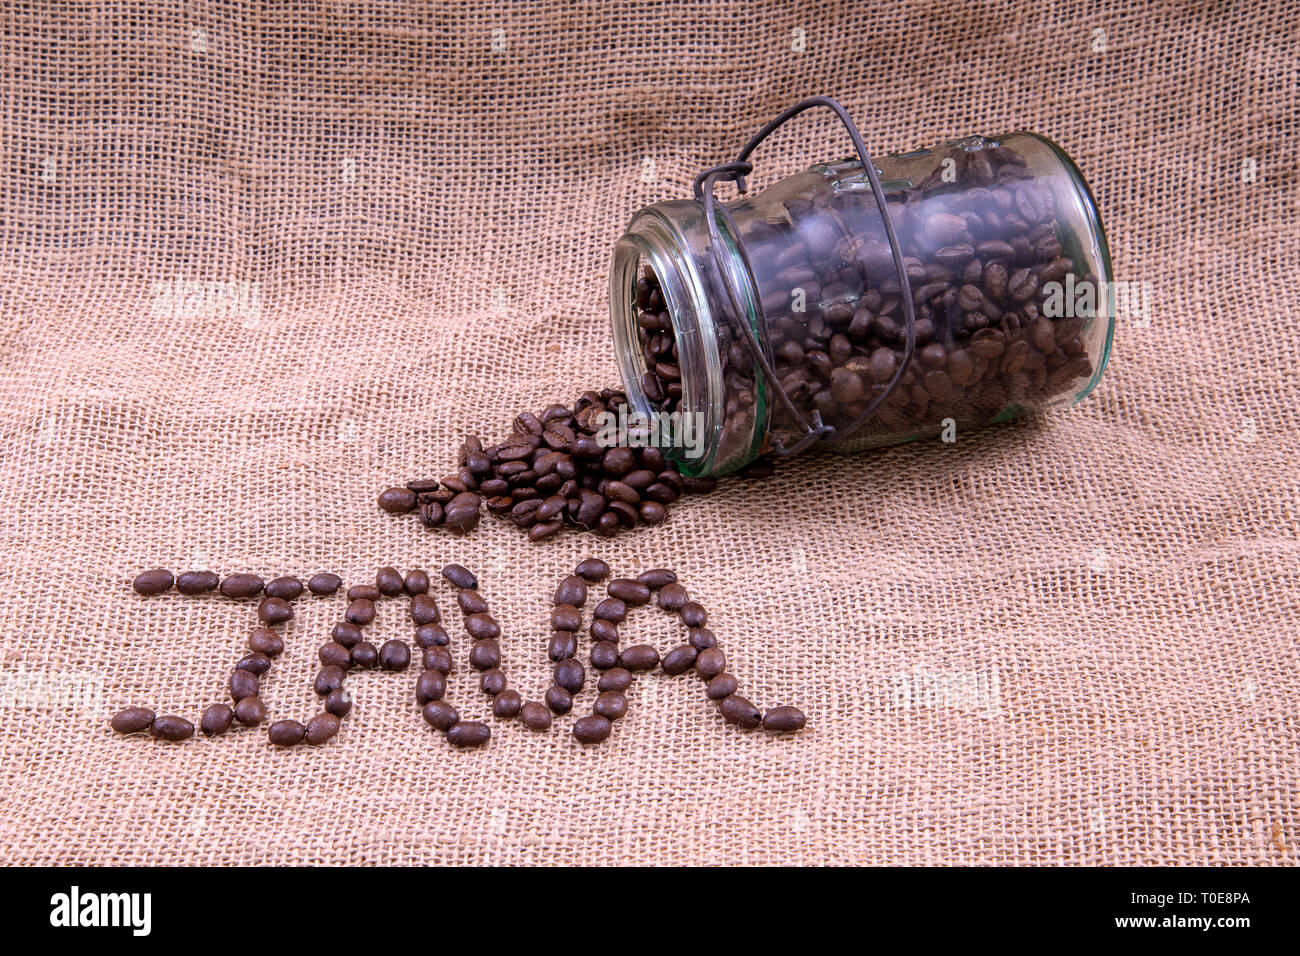 Coffee beans that spell Java and an antique jar with beans spilled out Stock Photo